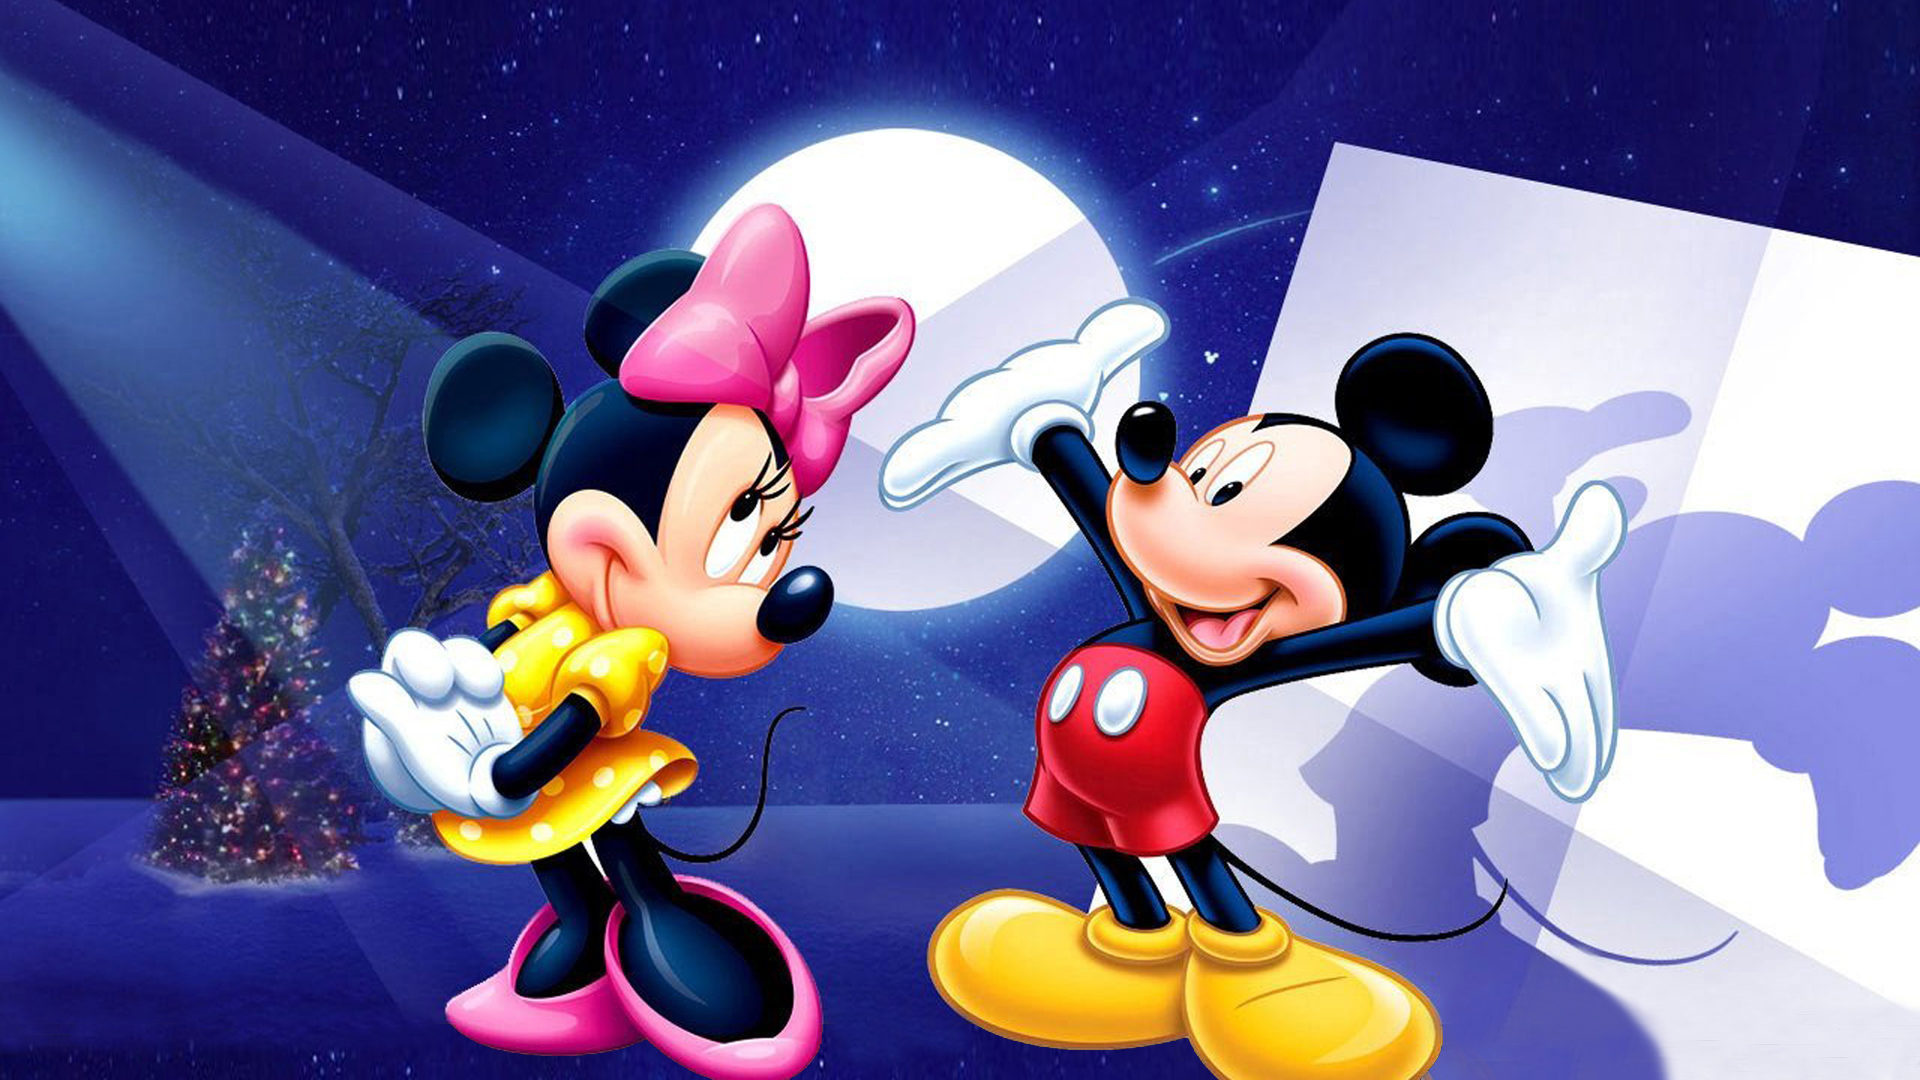 Minnie Mouse, Mickey and Minnie Mouse, Mobile wallpapers, Free download, 1920x1080 Full HD Desktop